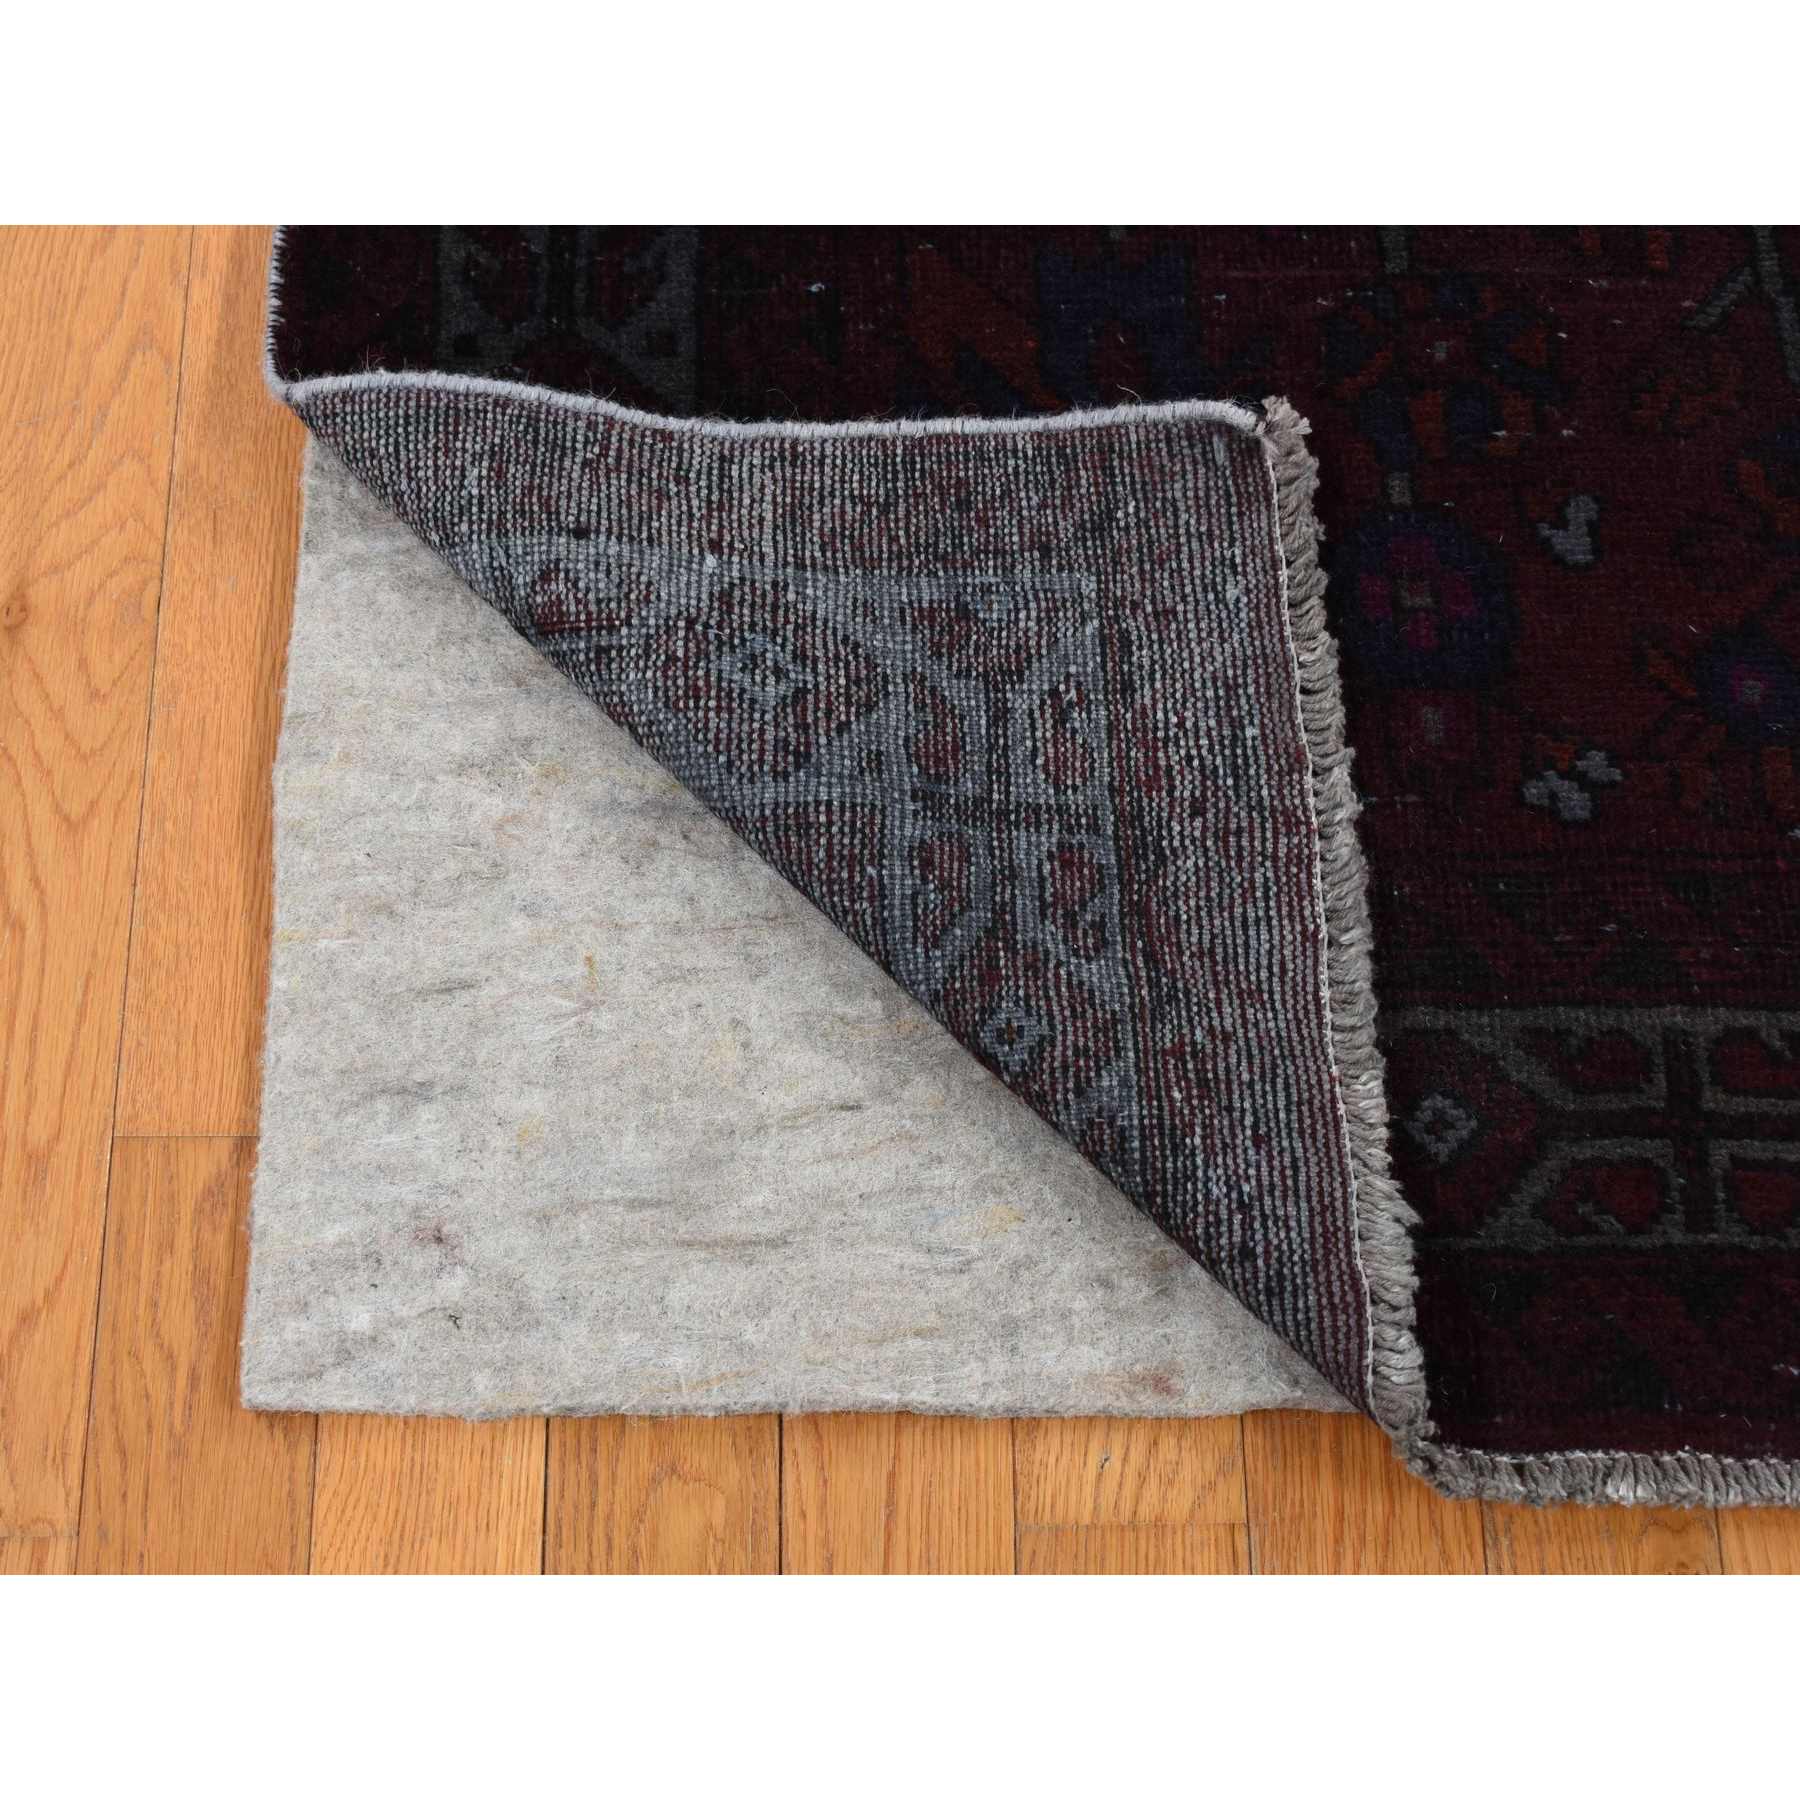 Overdyed-Vintage-Hand-Knotted-Rug-404480